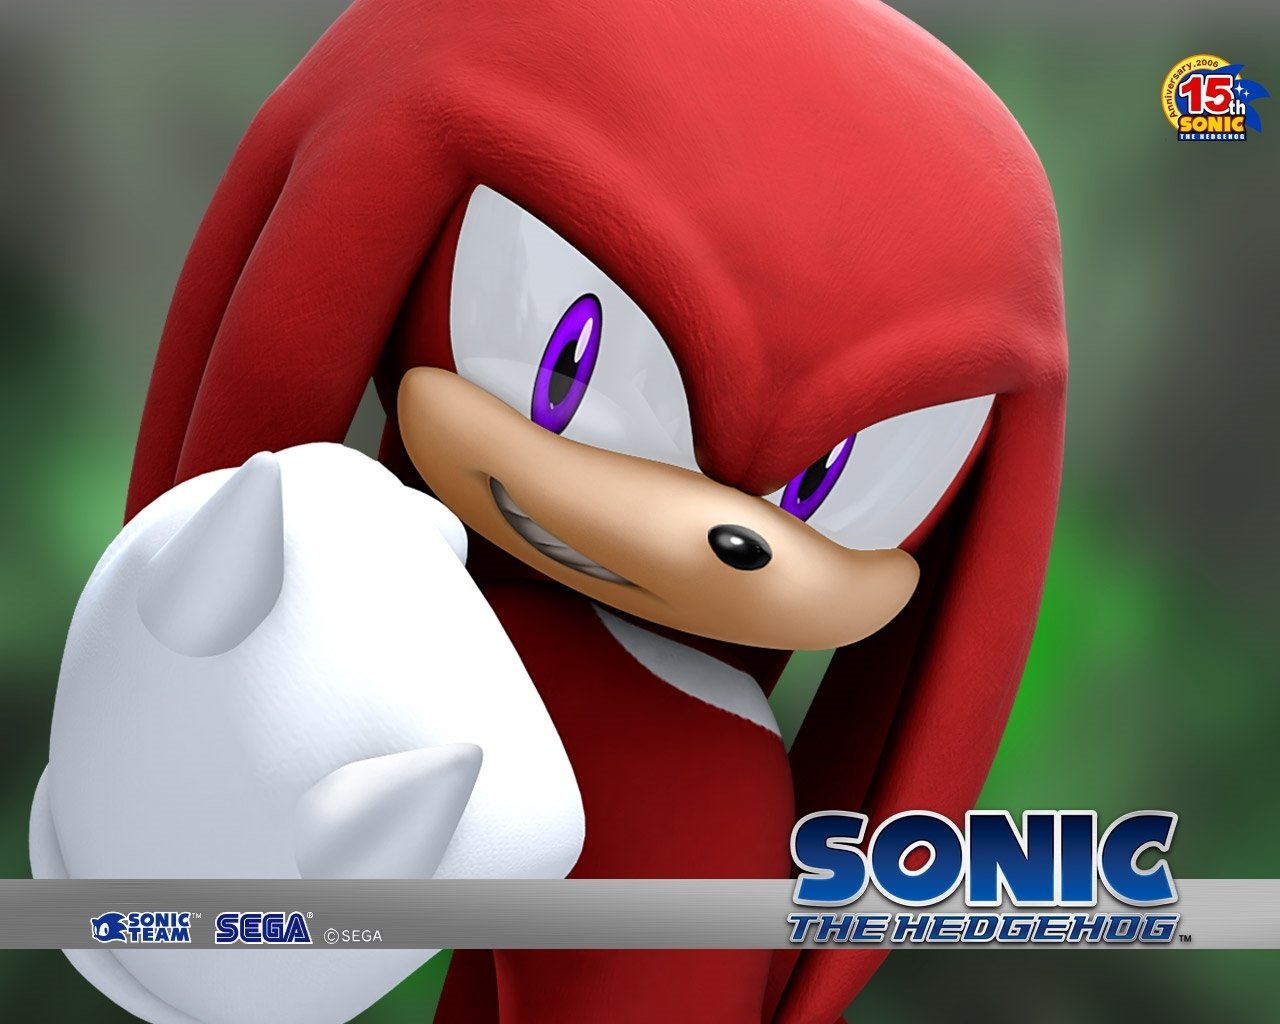 Sonic the Hedgehog images knuckles wallpaper wallpaper photos